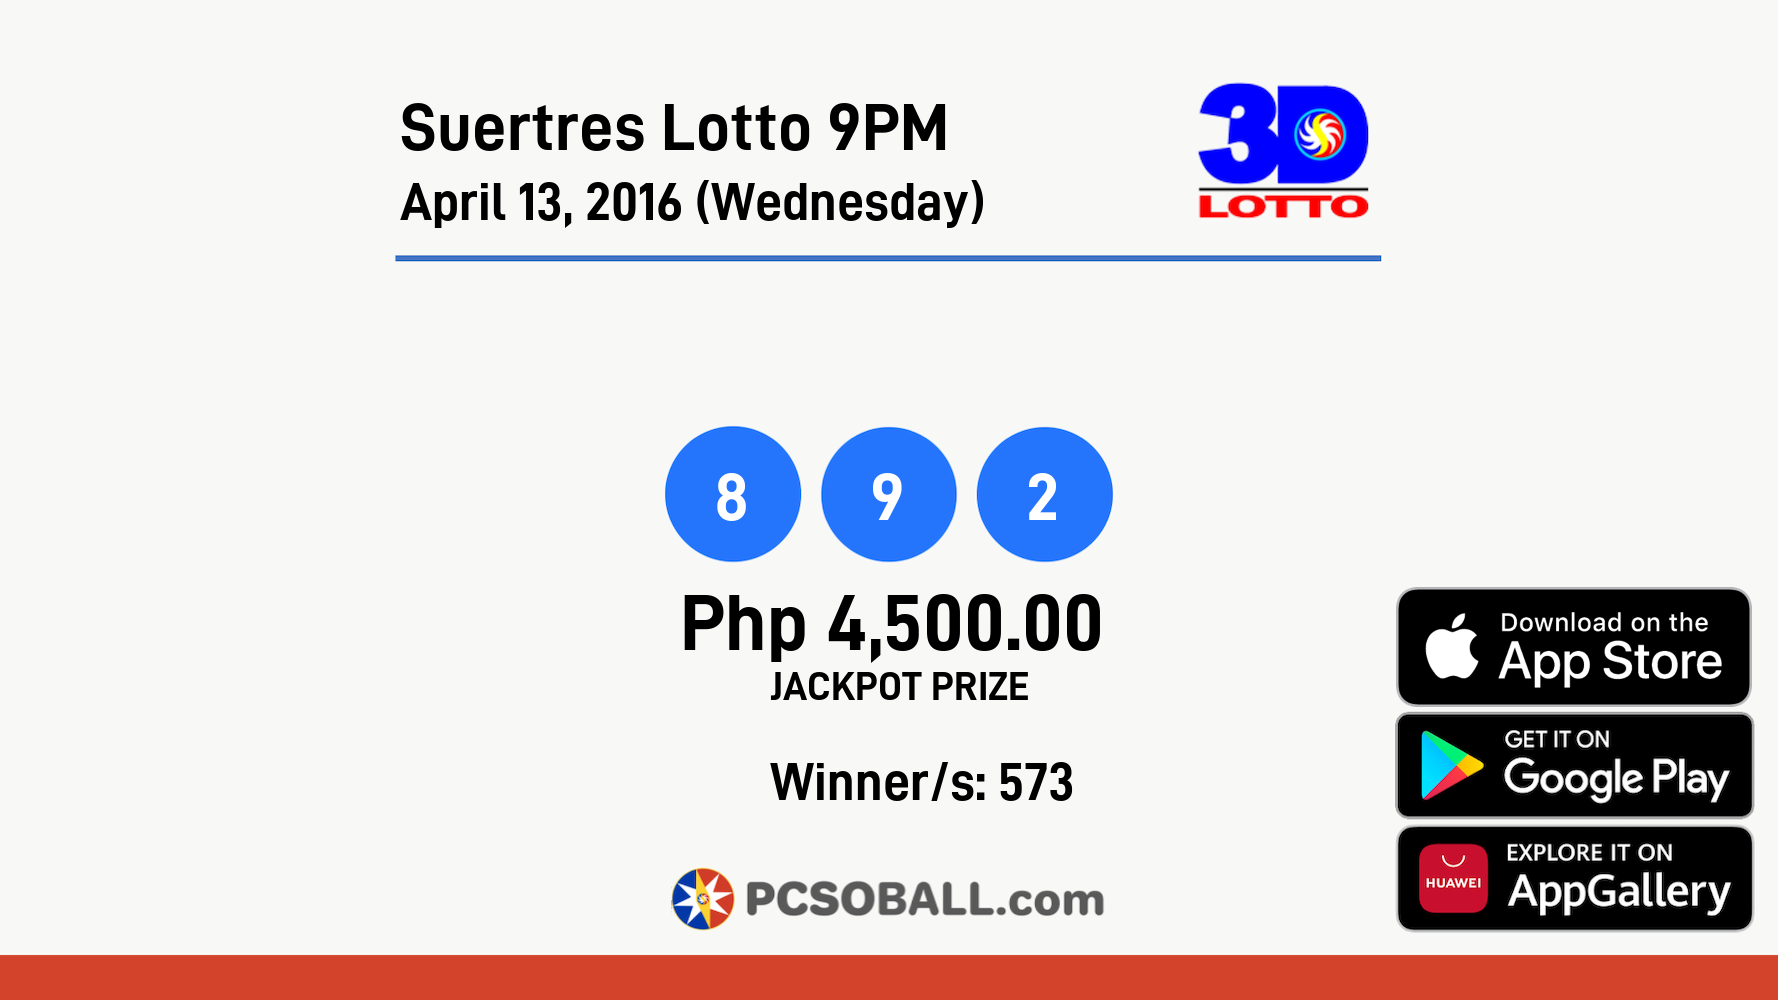 Suertres Lotto 9PM April 13, 2016 (Wednesday) Result